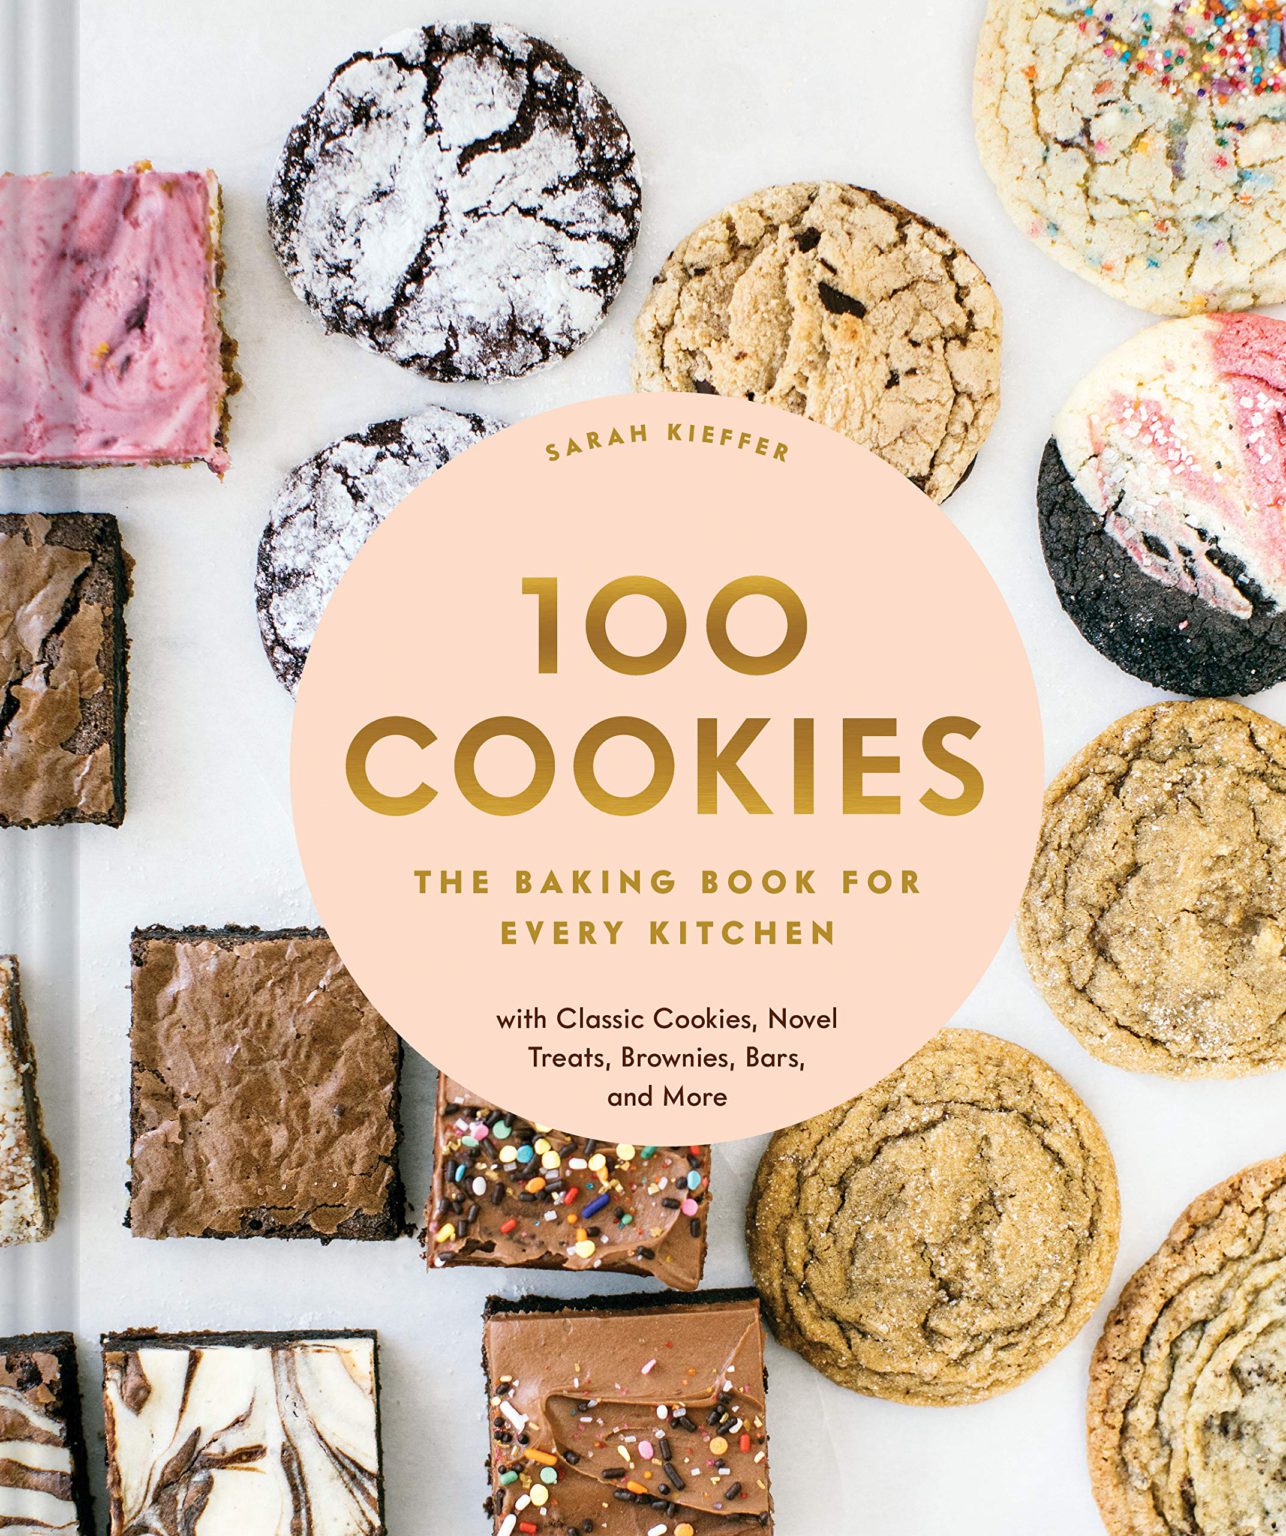 100 Cookies The Baking Book for Every Kitchen, with Classic Cookies